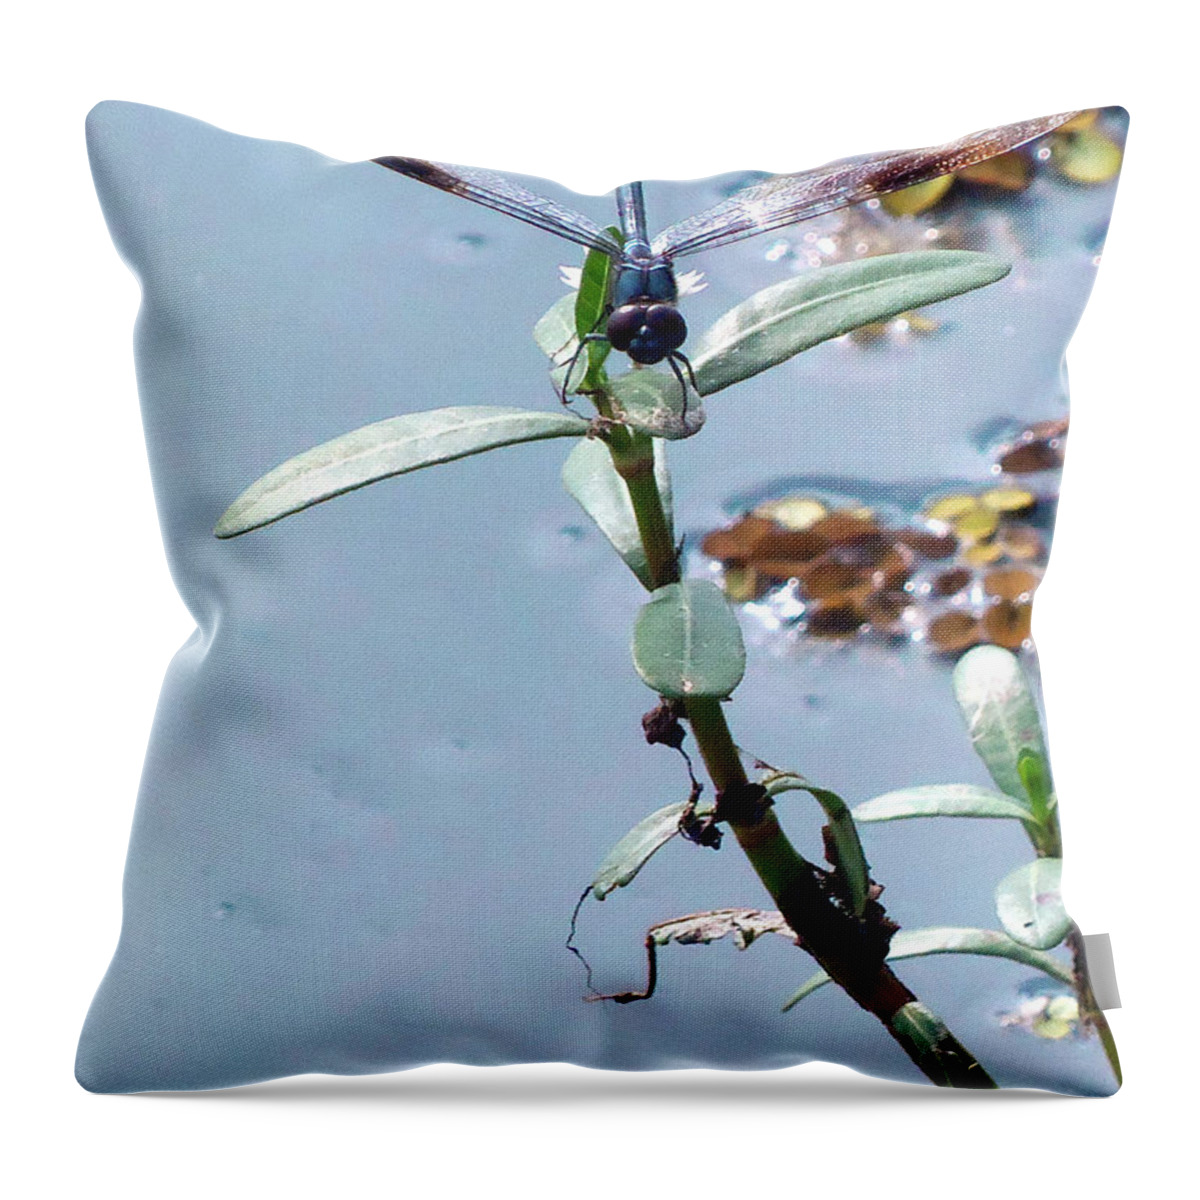 Dragonfly Throw Pillow featuring the photograph Dragonfly by Christopher Mercer